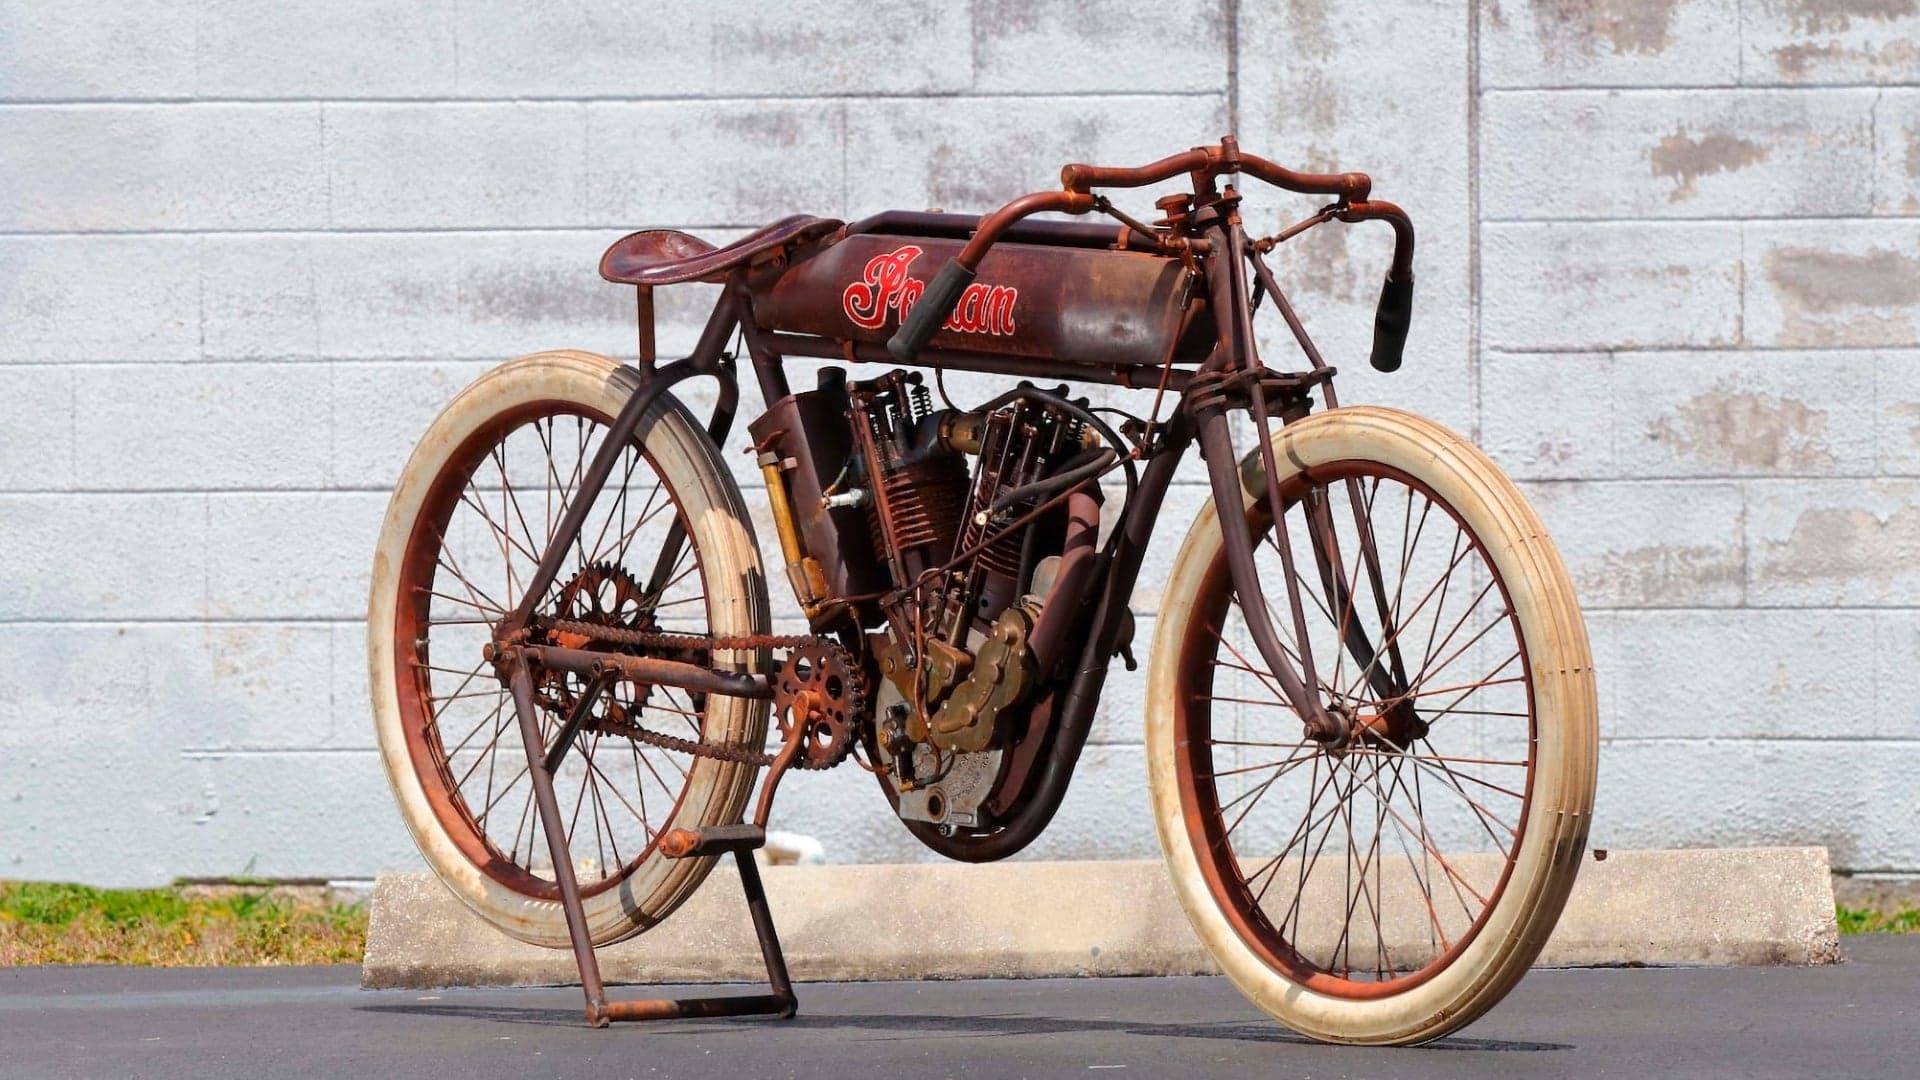 105-Year-Old Indian Board Track Racer Worth Big Money Unearthed in South American Barn Find